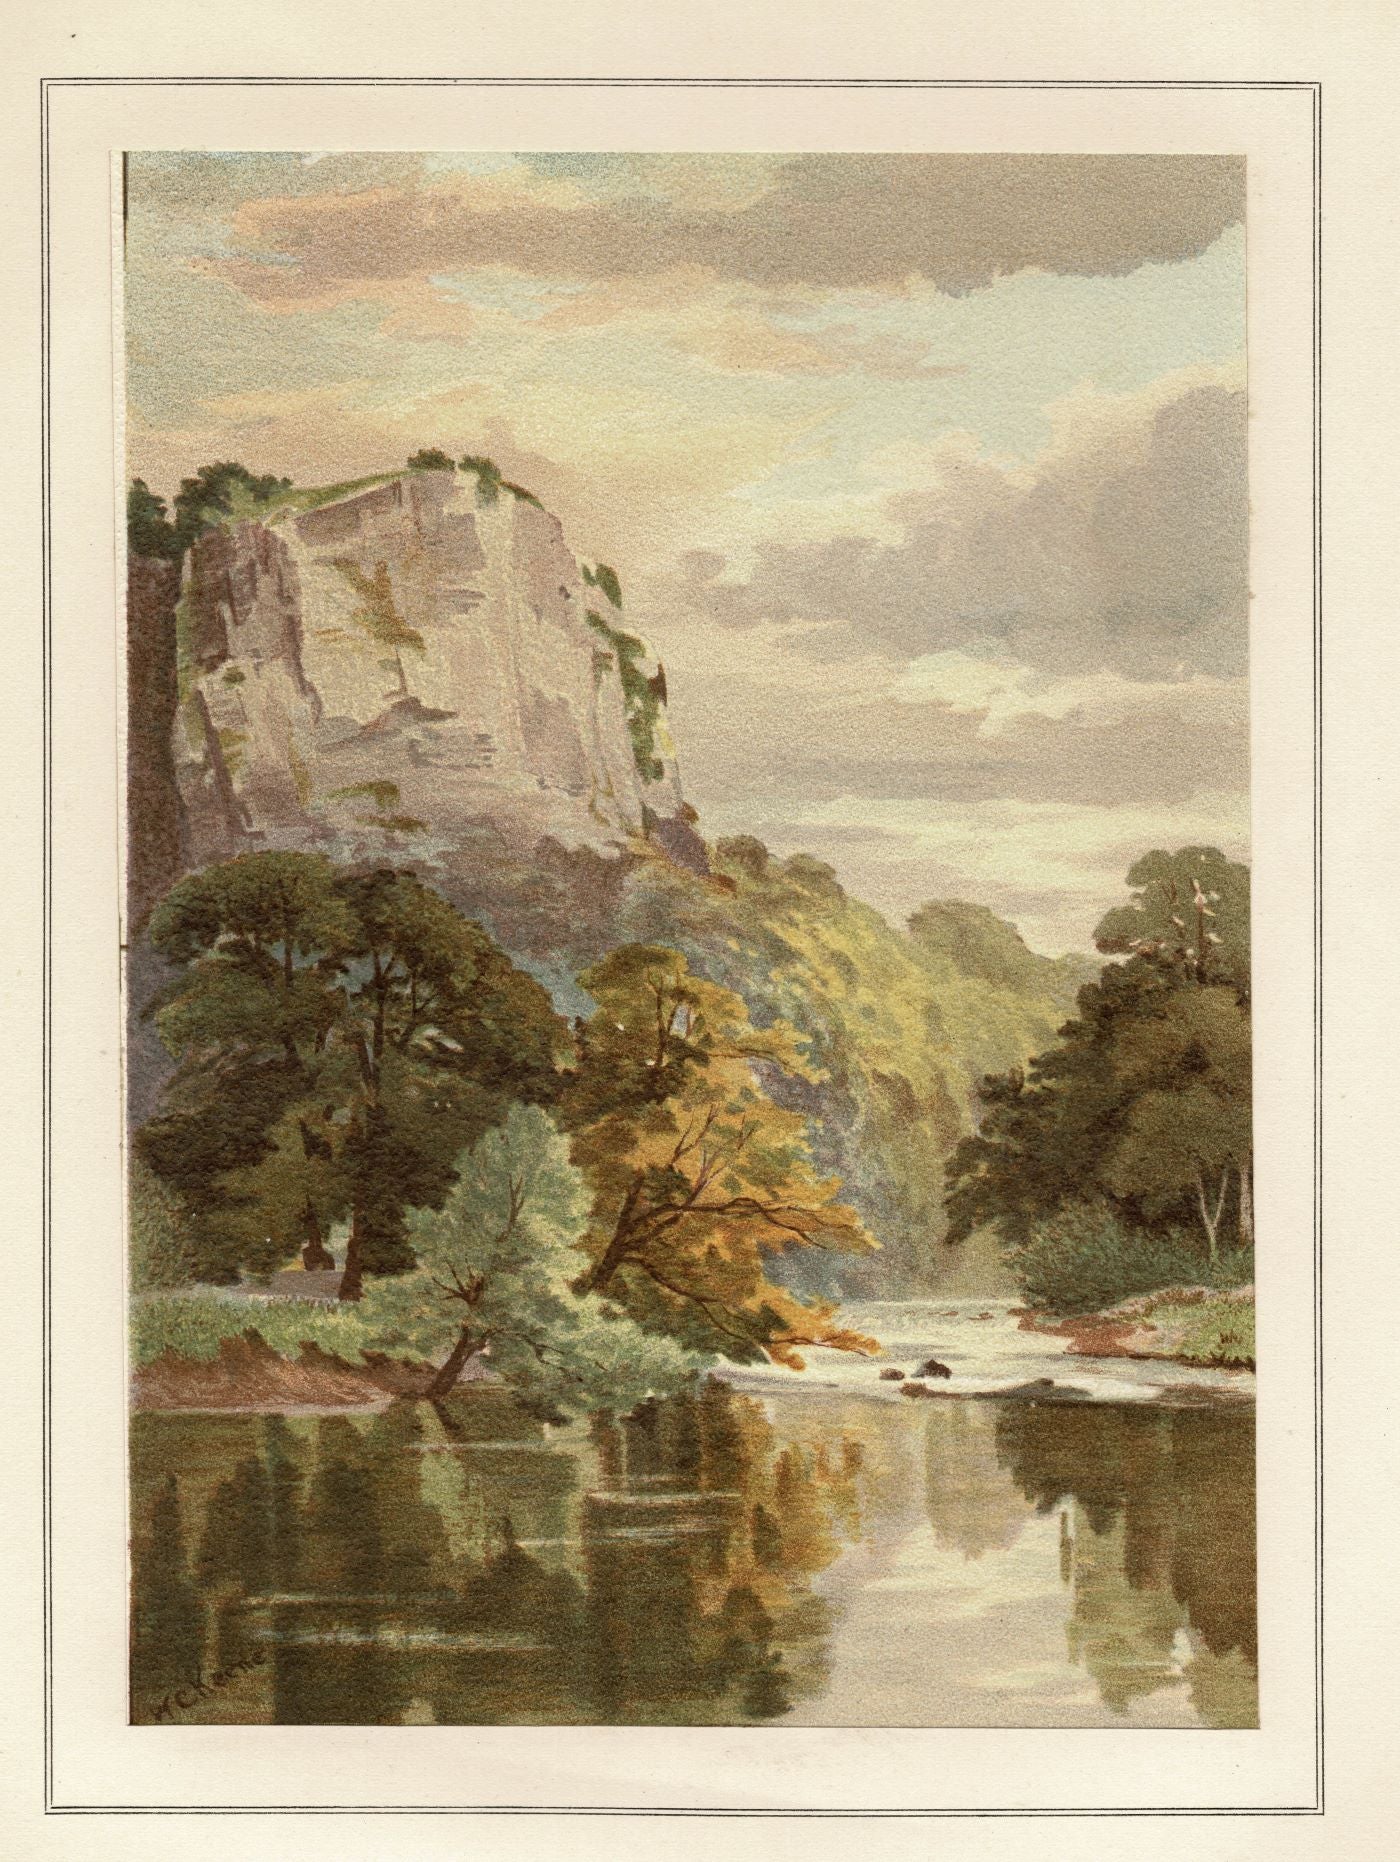 Wye at Chee Tor Buxton Derbyshire antique print, 1879